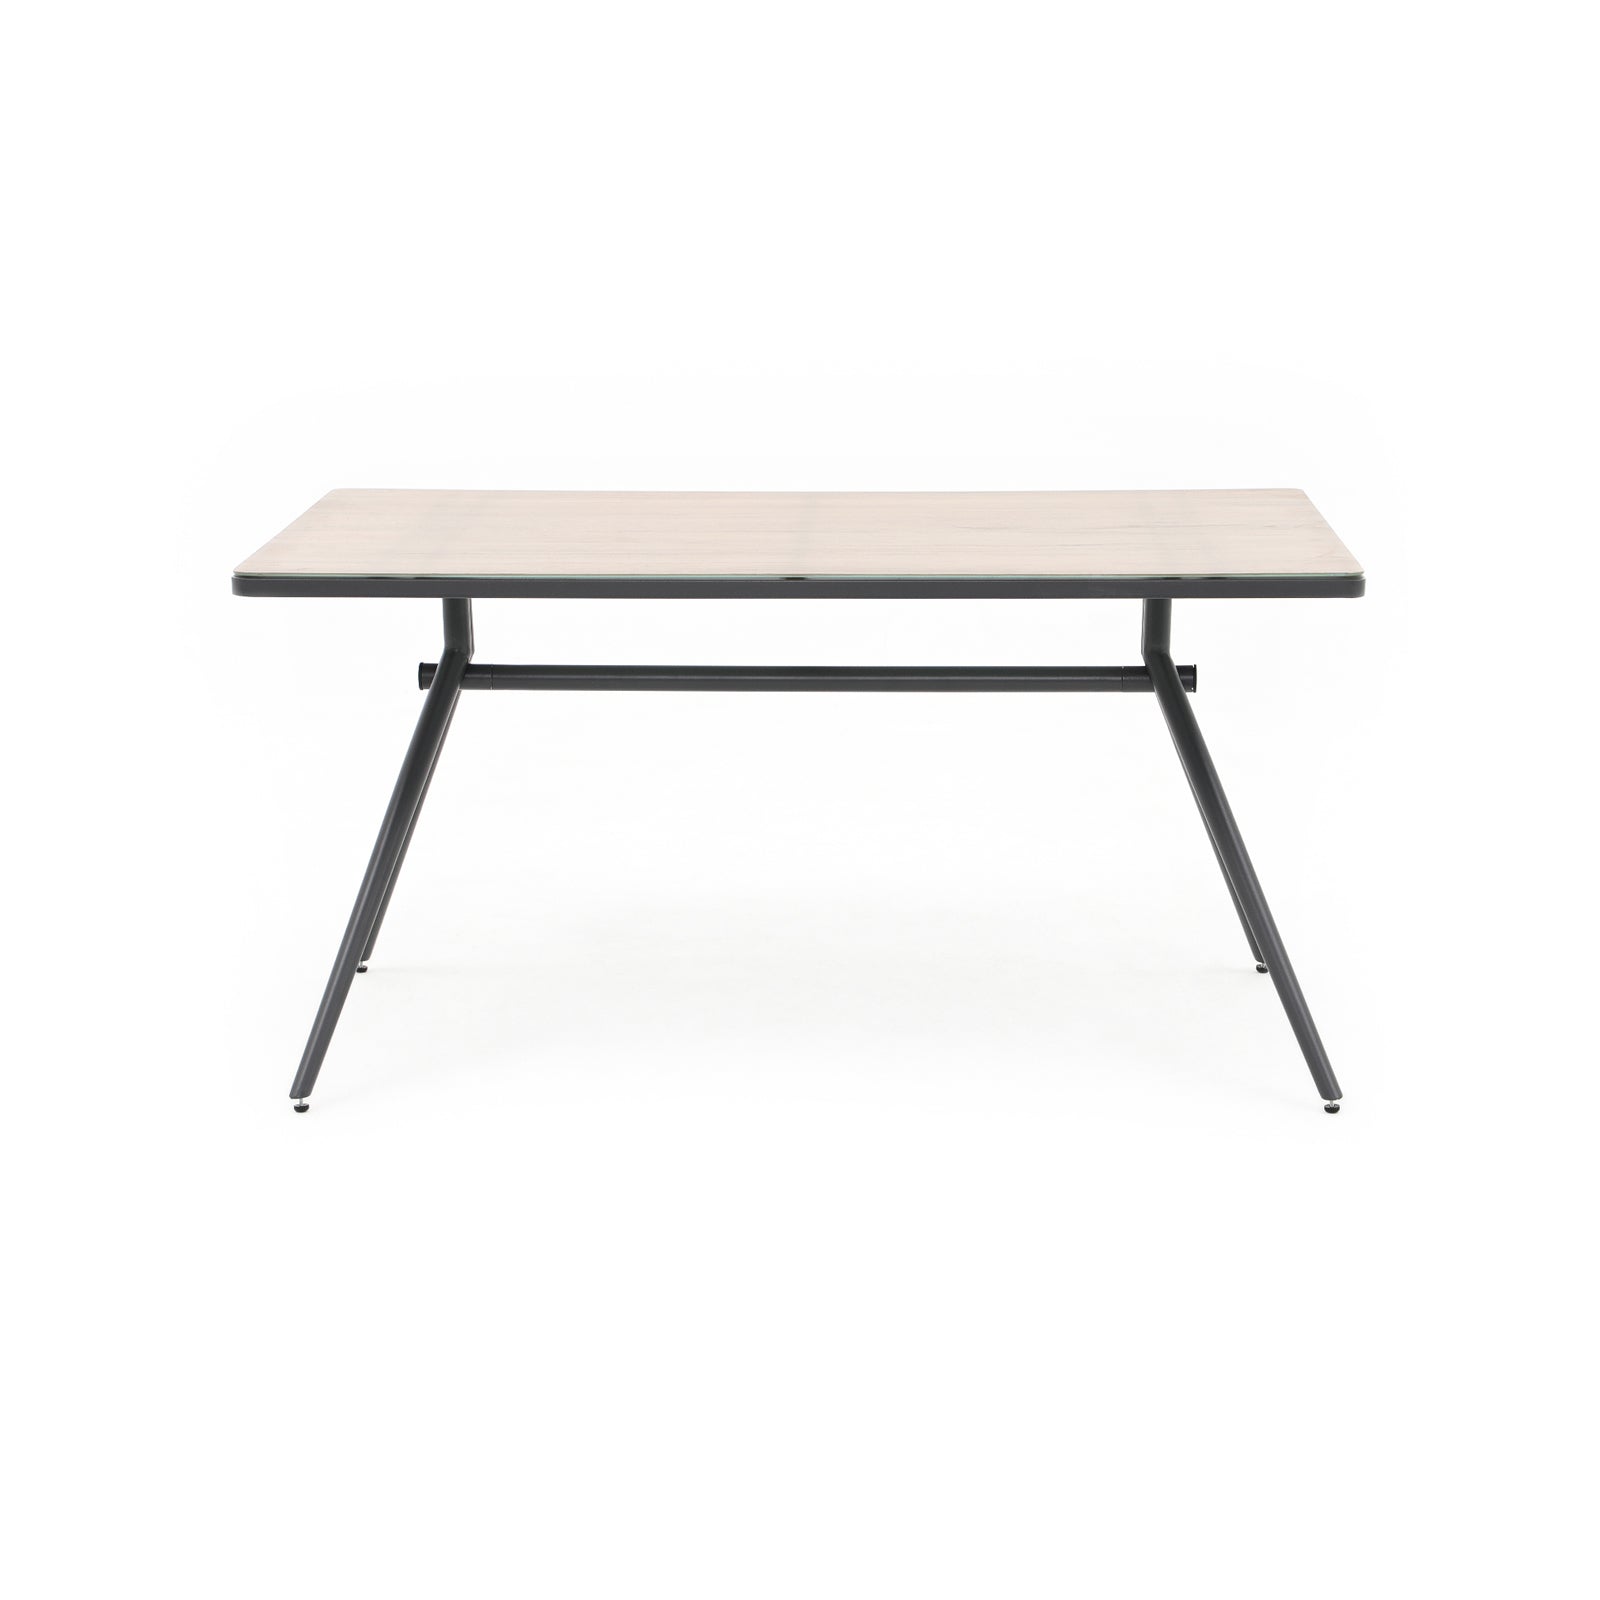 Hallerbos Modern rectangle outdoor Dining Table with steel frame, resin ceramic glass top, front - Jardina Furniture